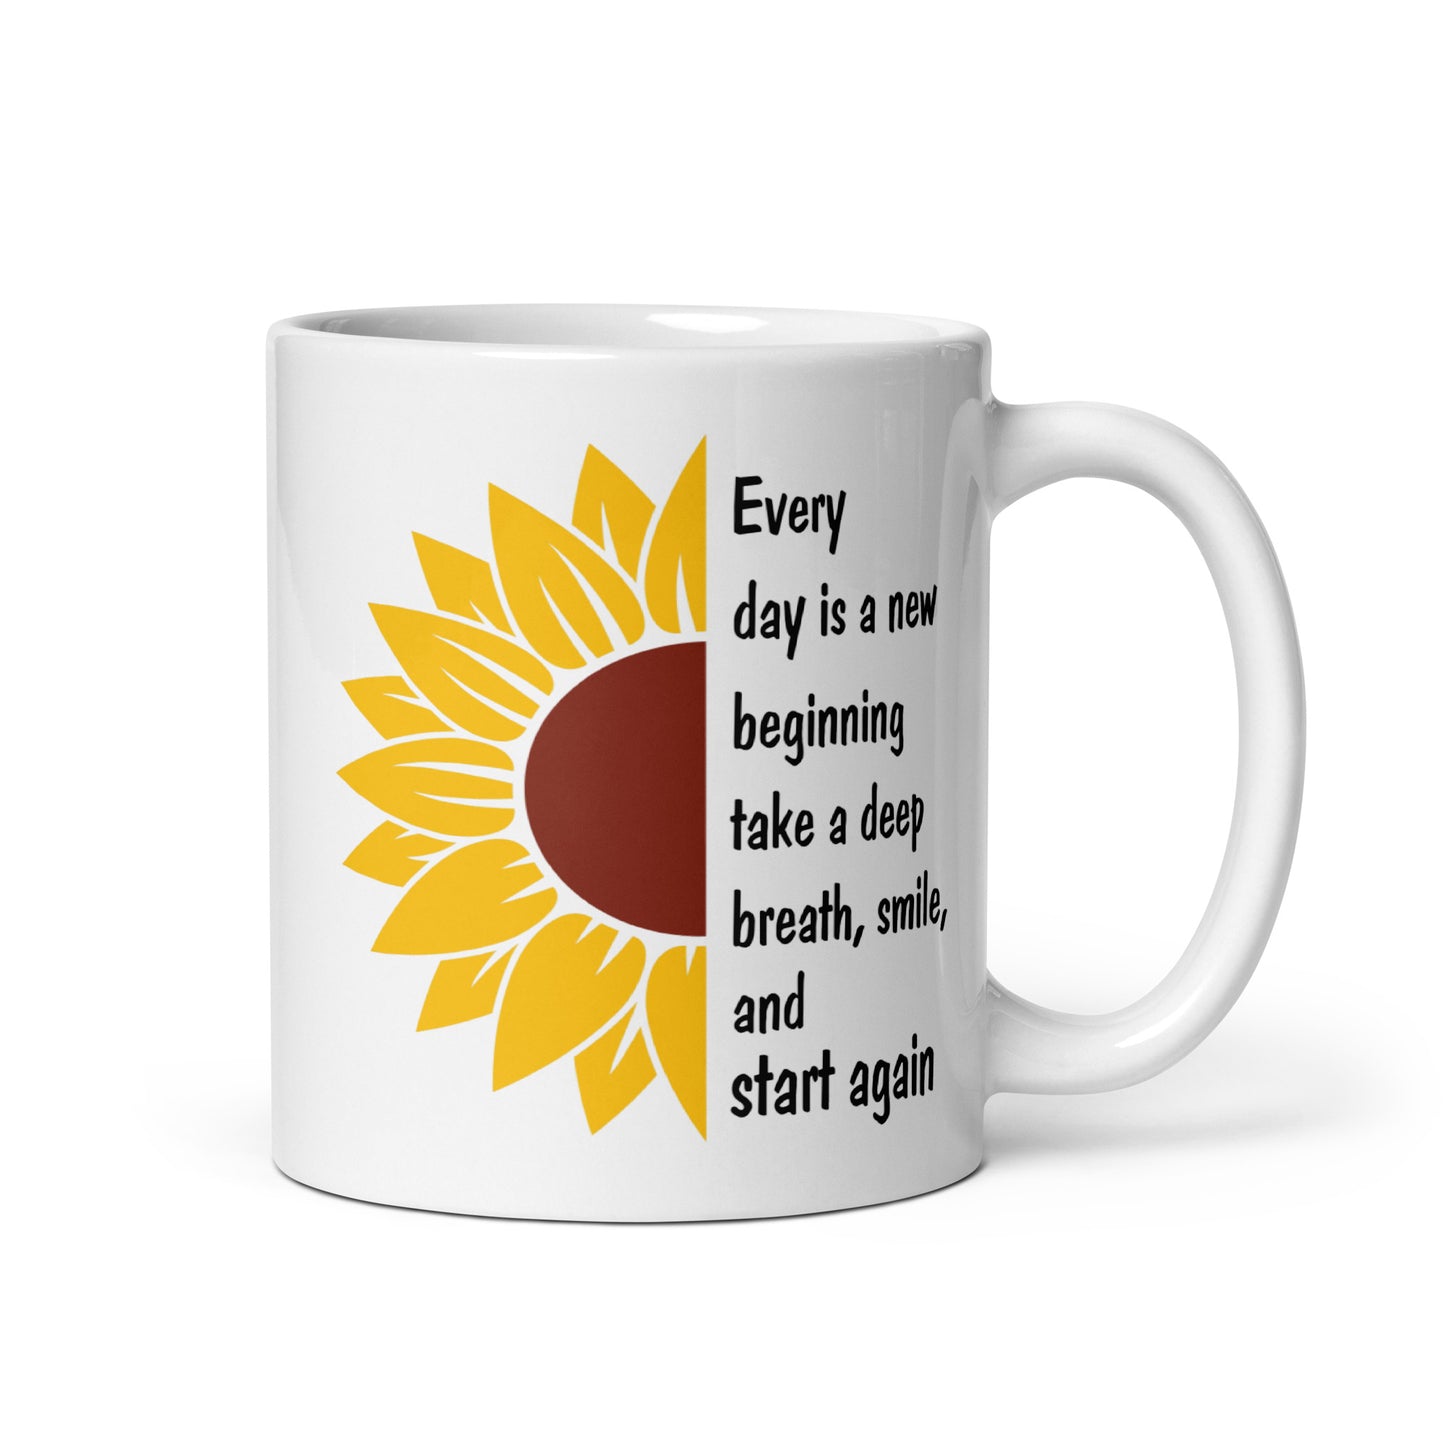 Every Day is a New Beginning White Ceramic Coffee Mug